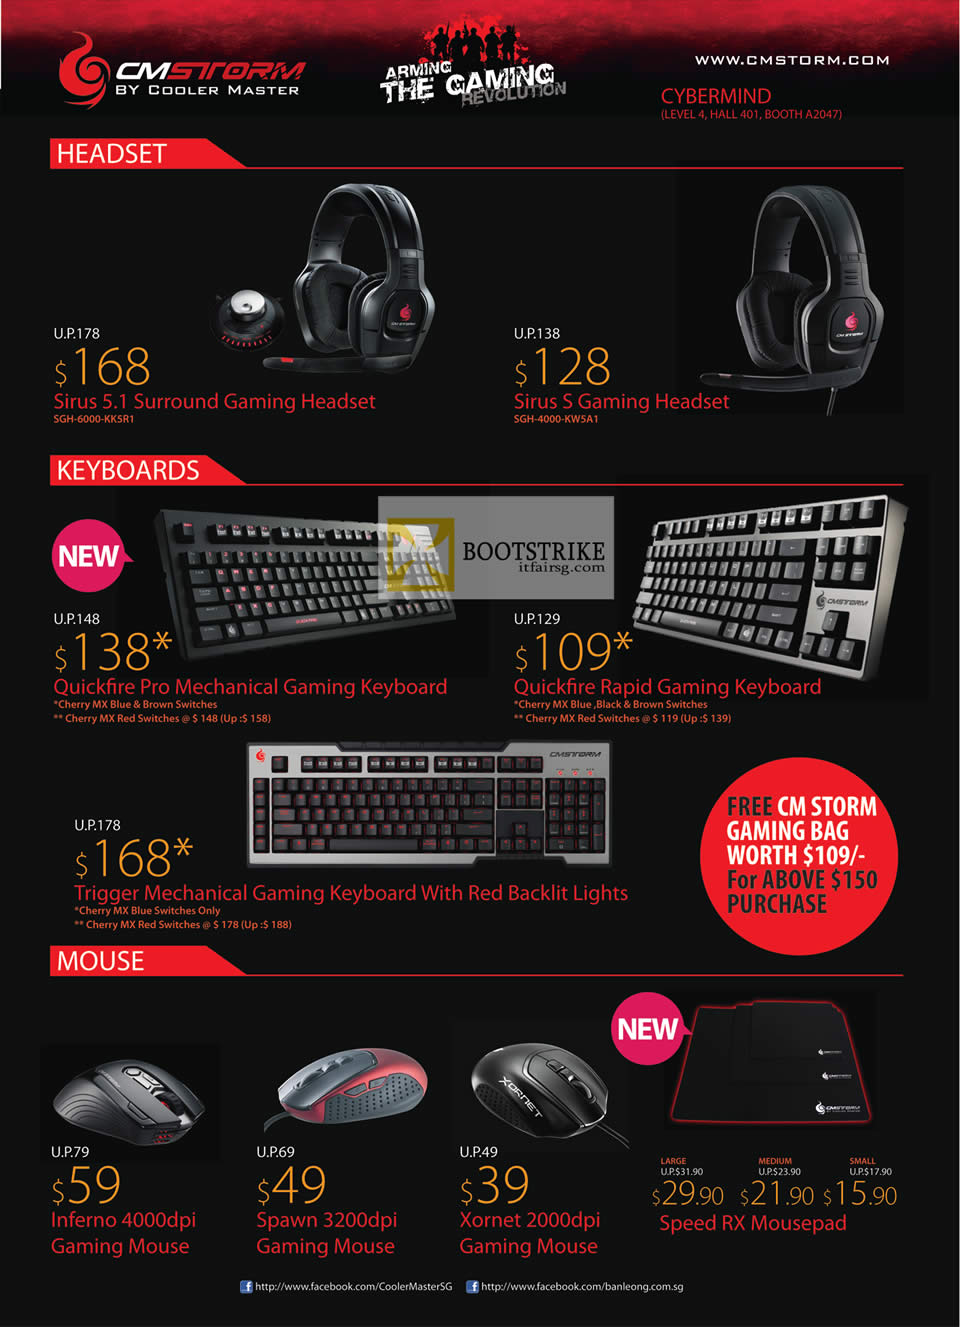 PC SHOW 2012 price list image brochure of Cybermind Cooler Master CMStorm, Sirus 5.1, S Headset, Quickfire Pro Keyboard, Rapid, Trigger, Xornet, Spawn, Inferno Gaming Mouse, Speed RX Mousepad